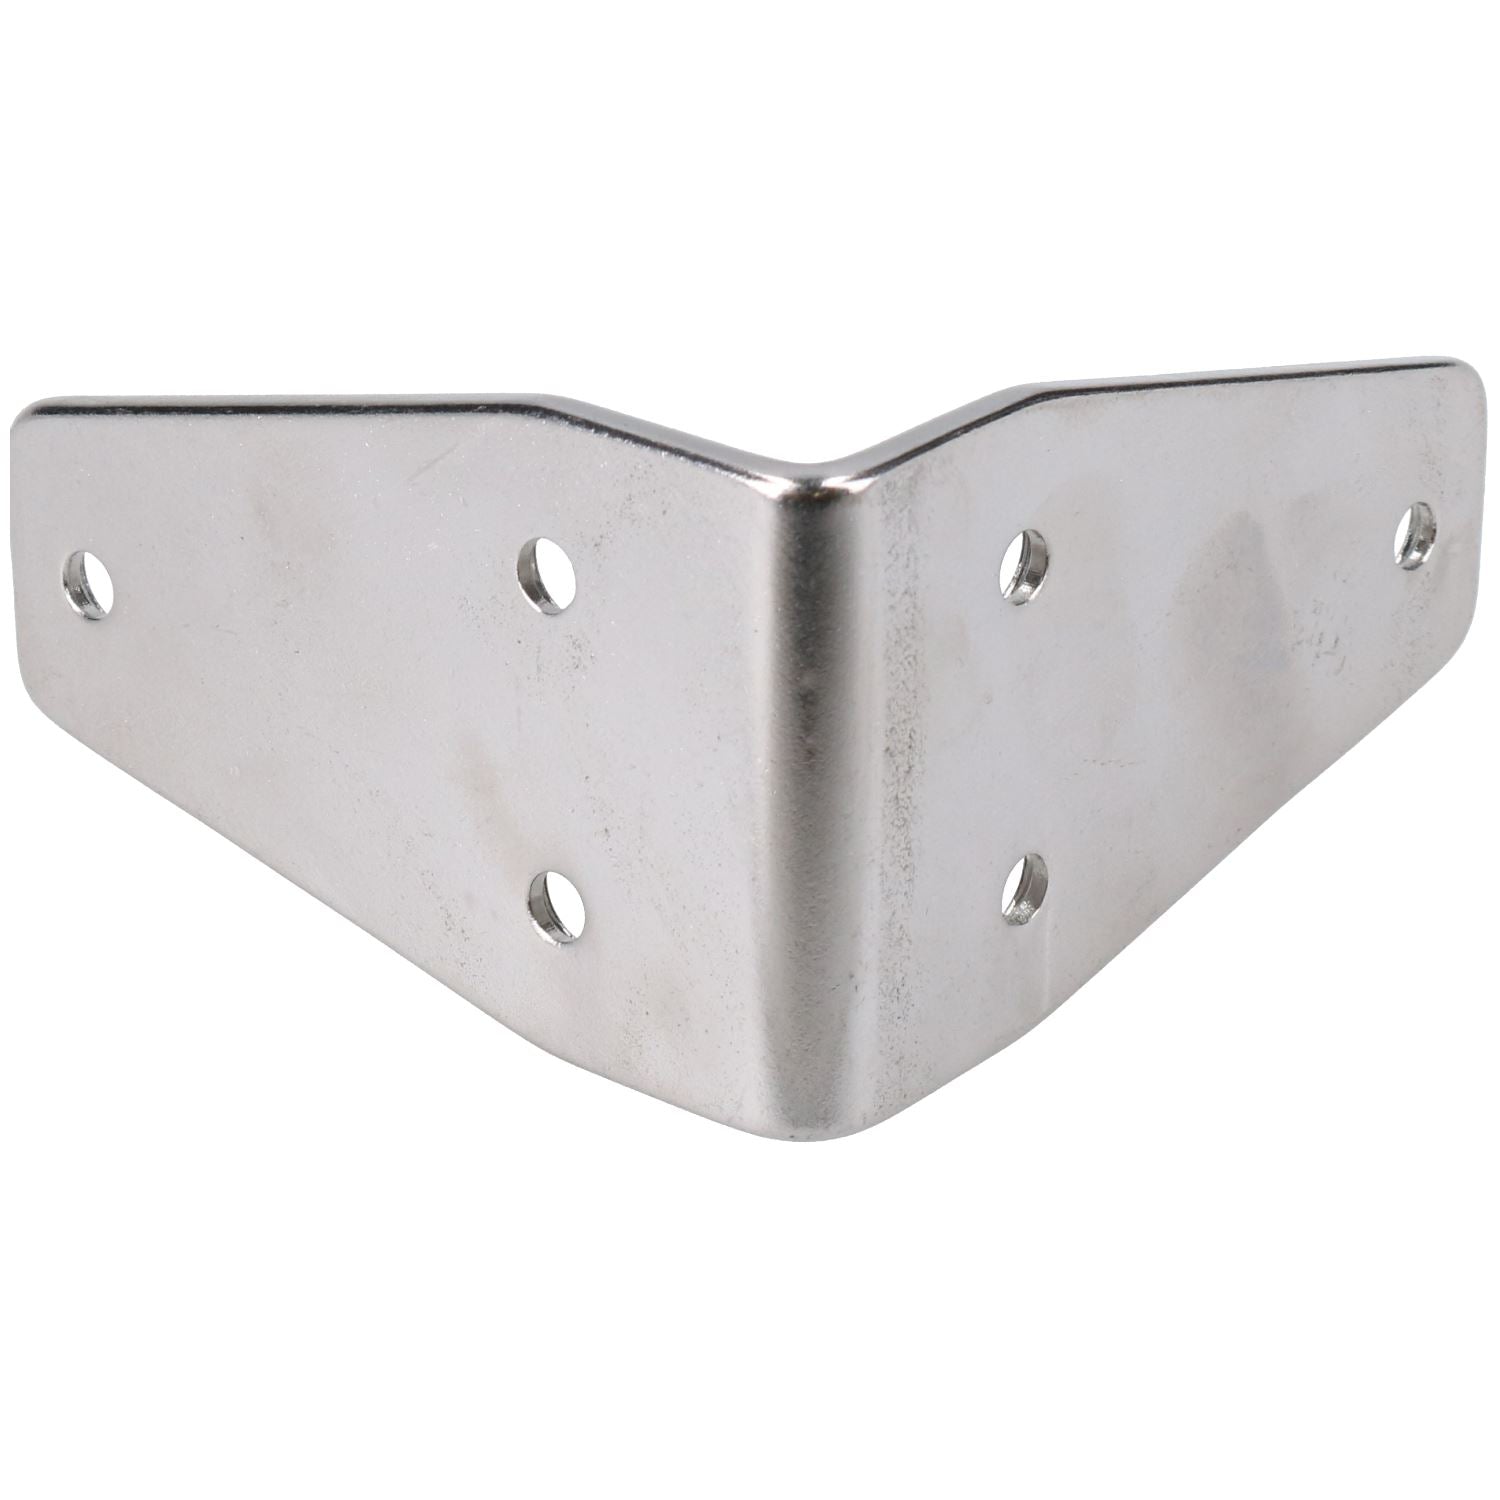 Marine Angle Brackets for Boat Decking Balcony 90 Degree 316 Stainless Steel